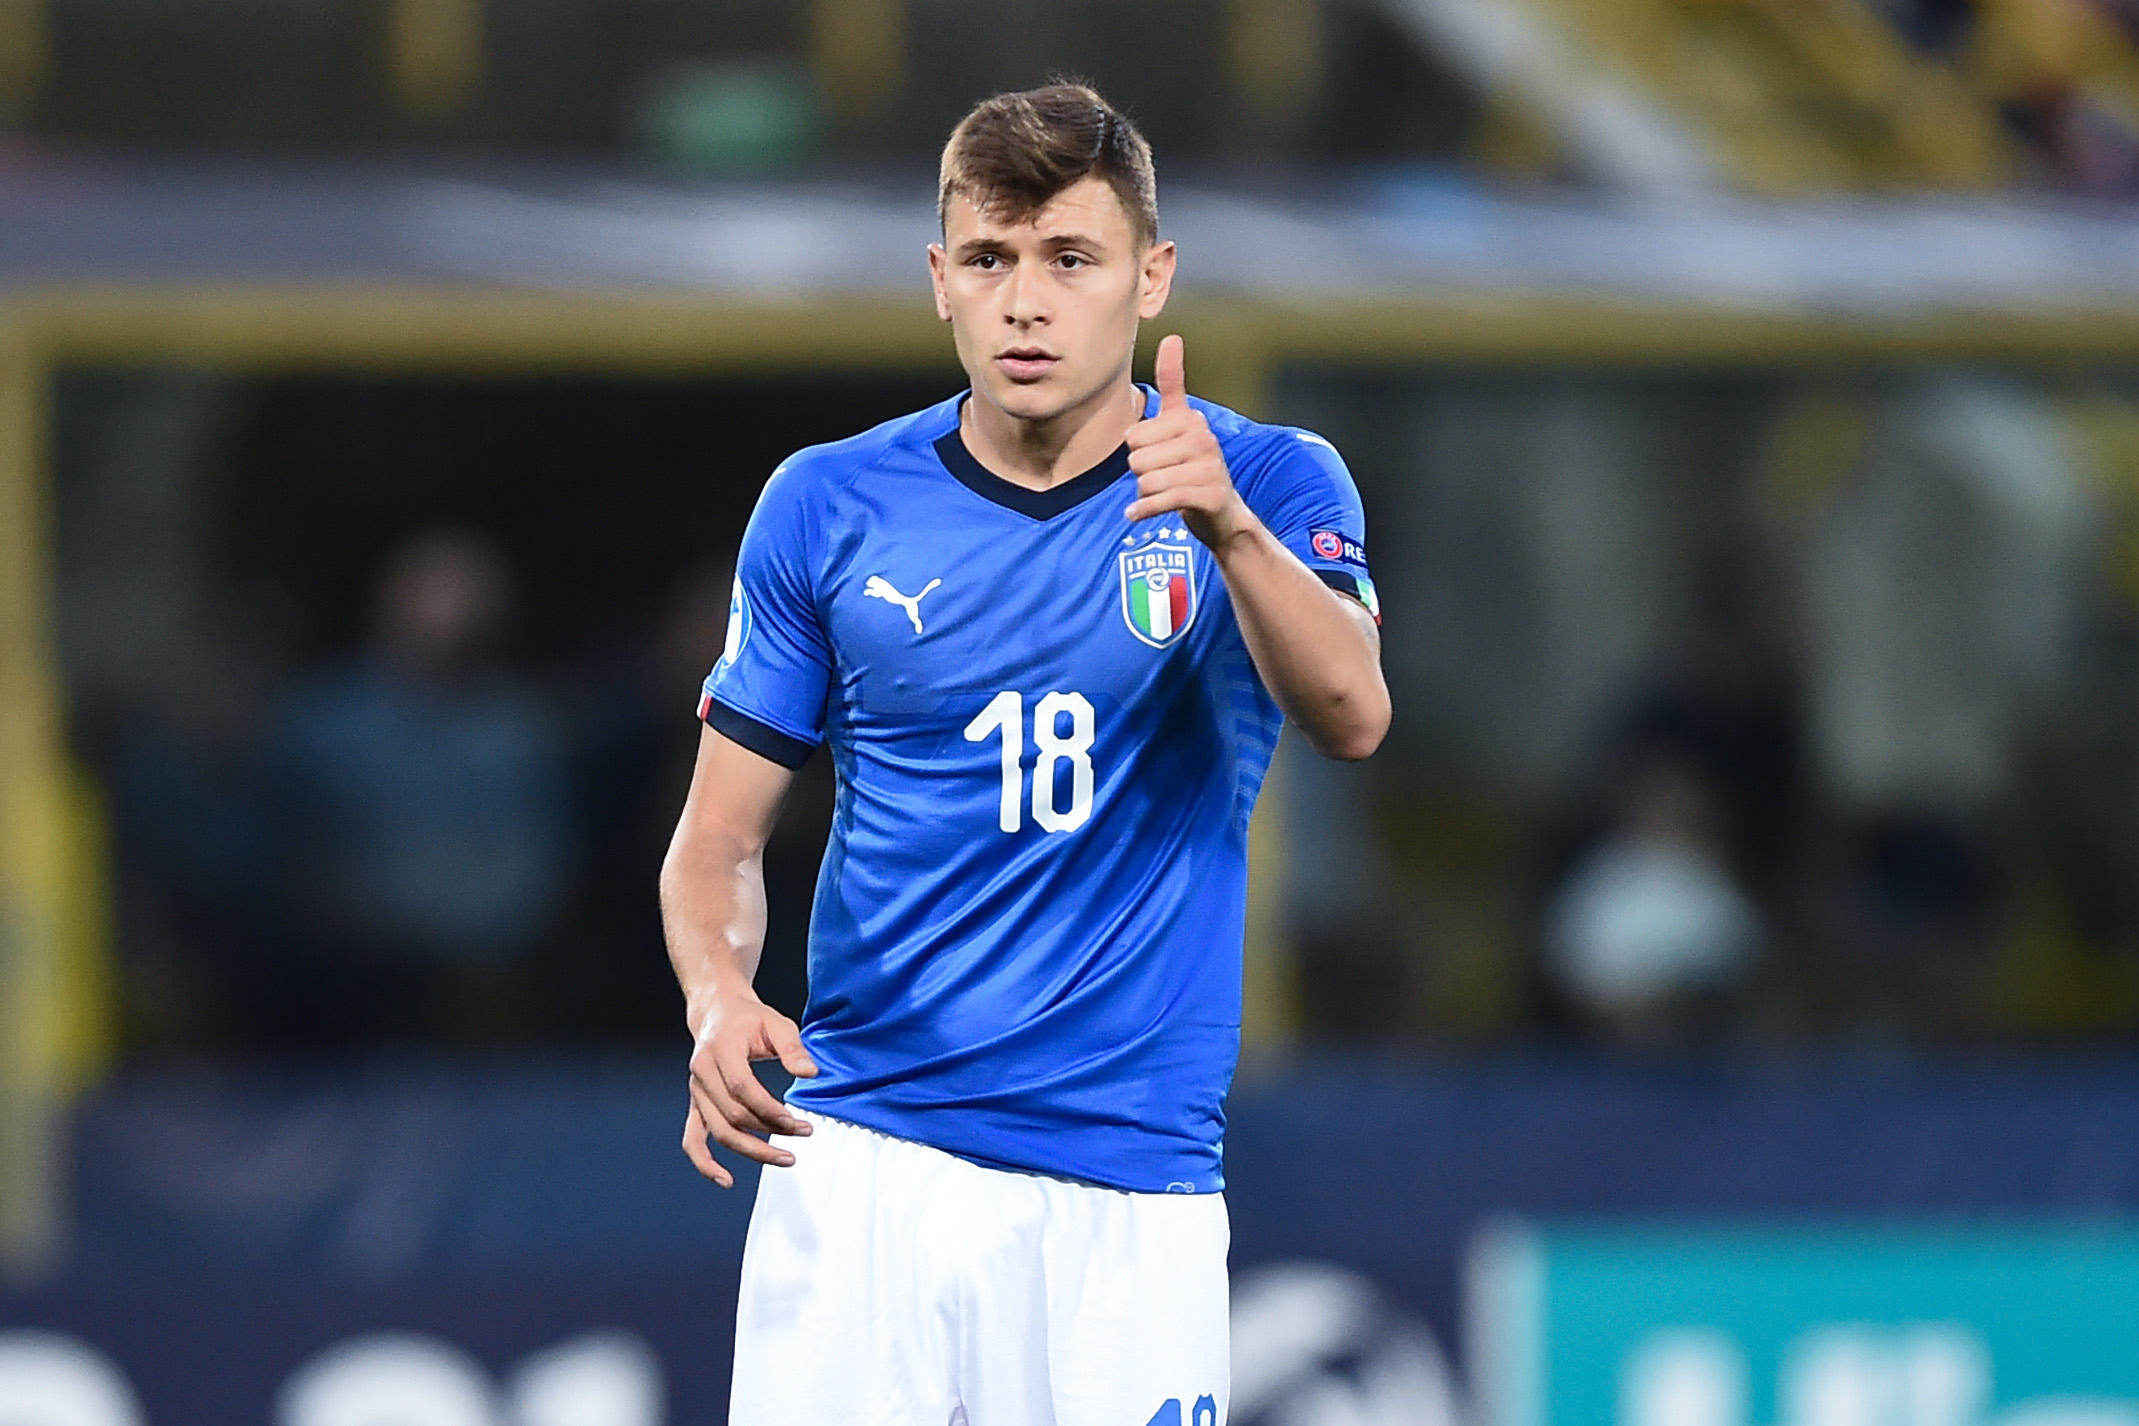 Barella is the man of the match for Italy Vs Netherlands